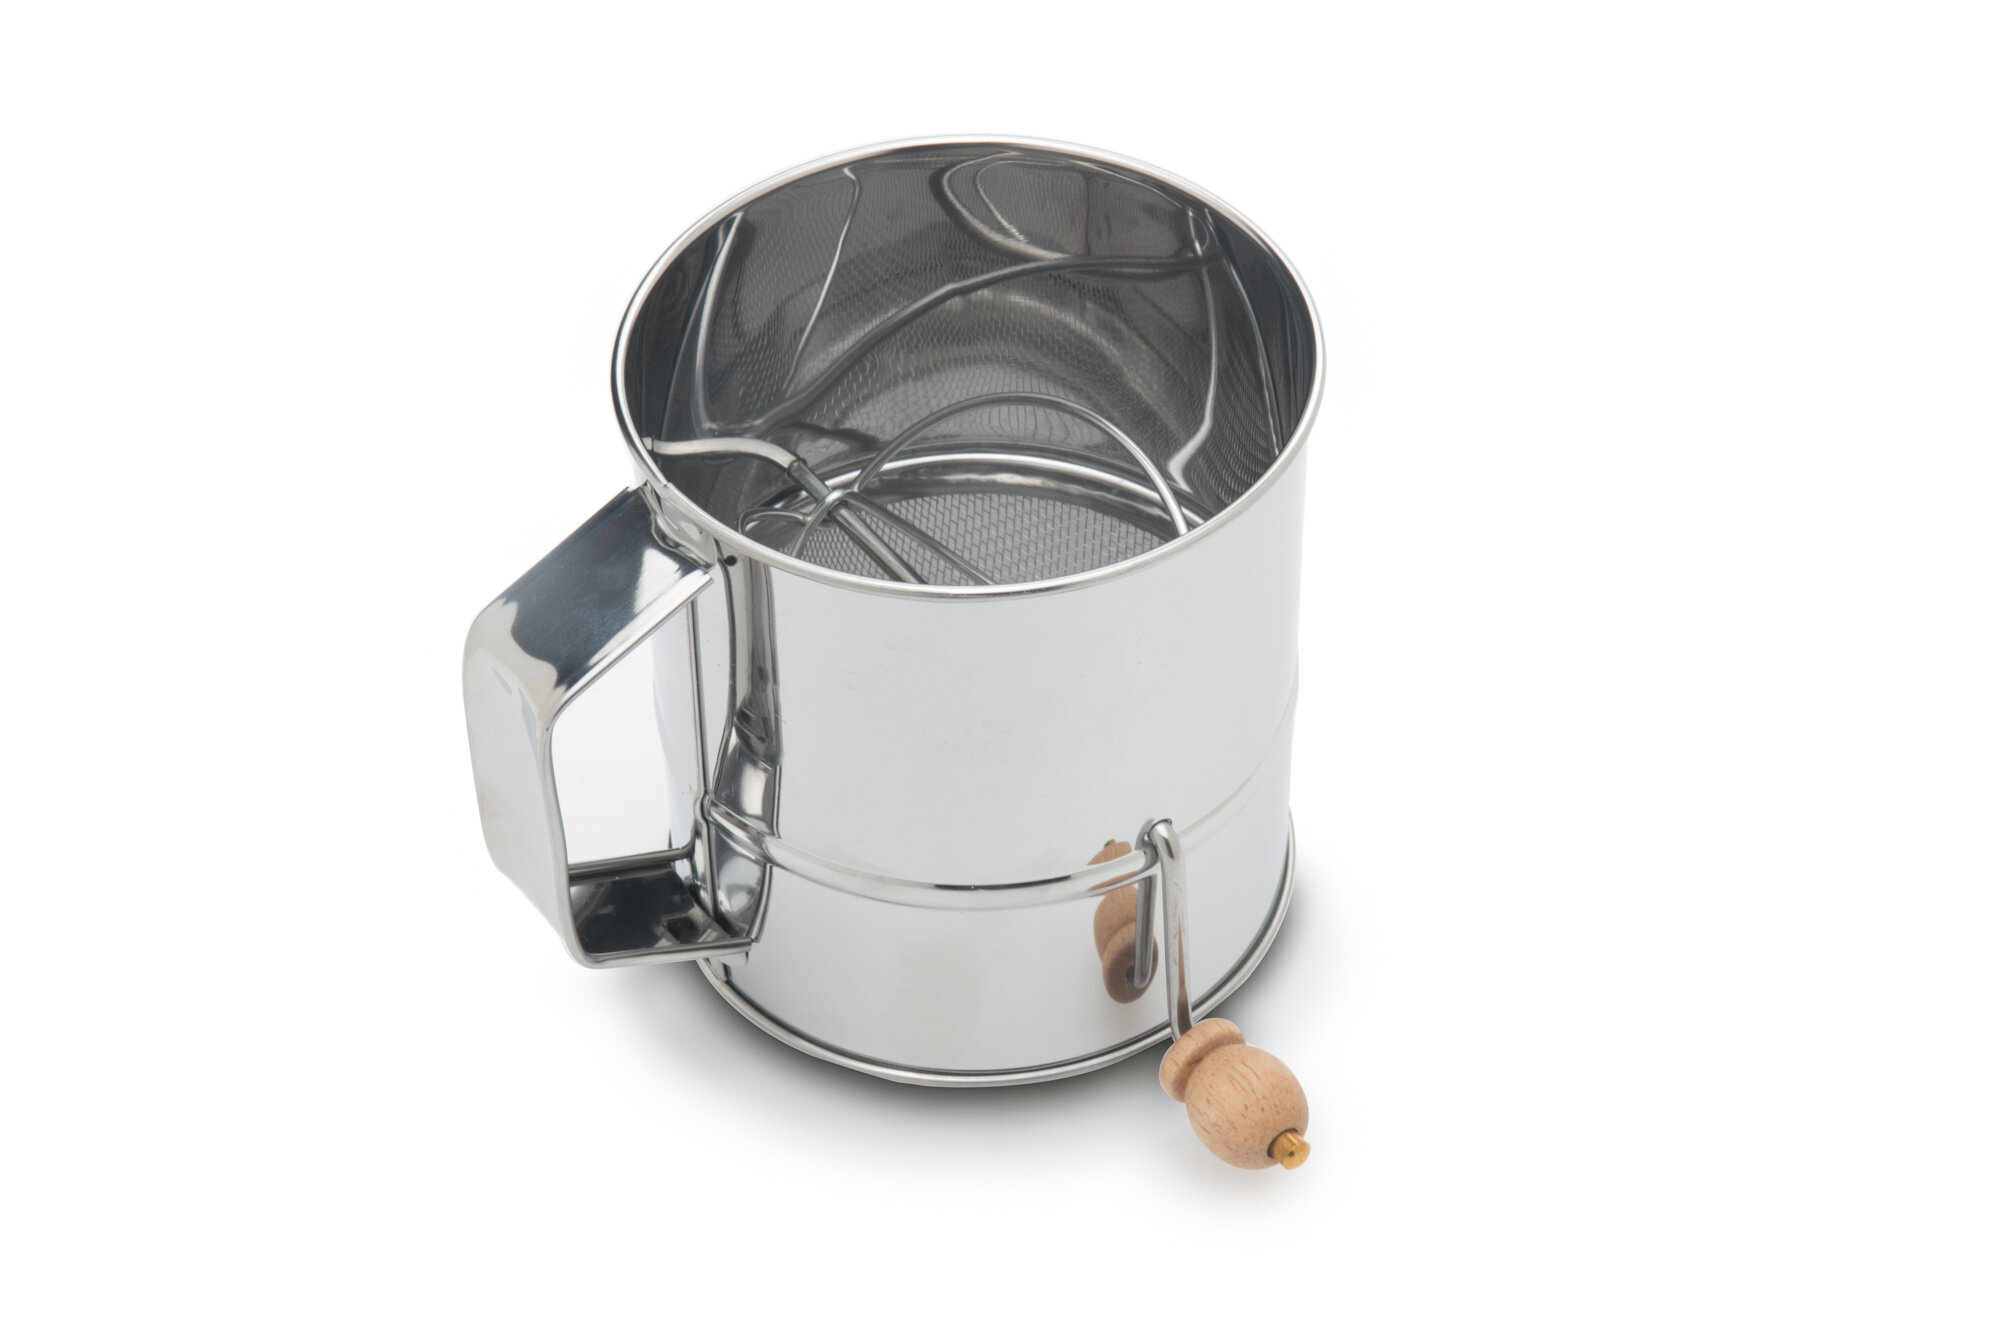 Pull flour sifter